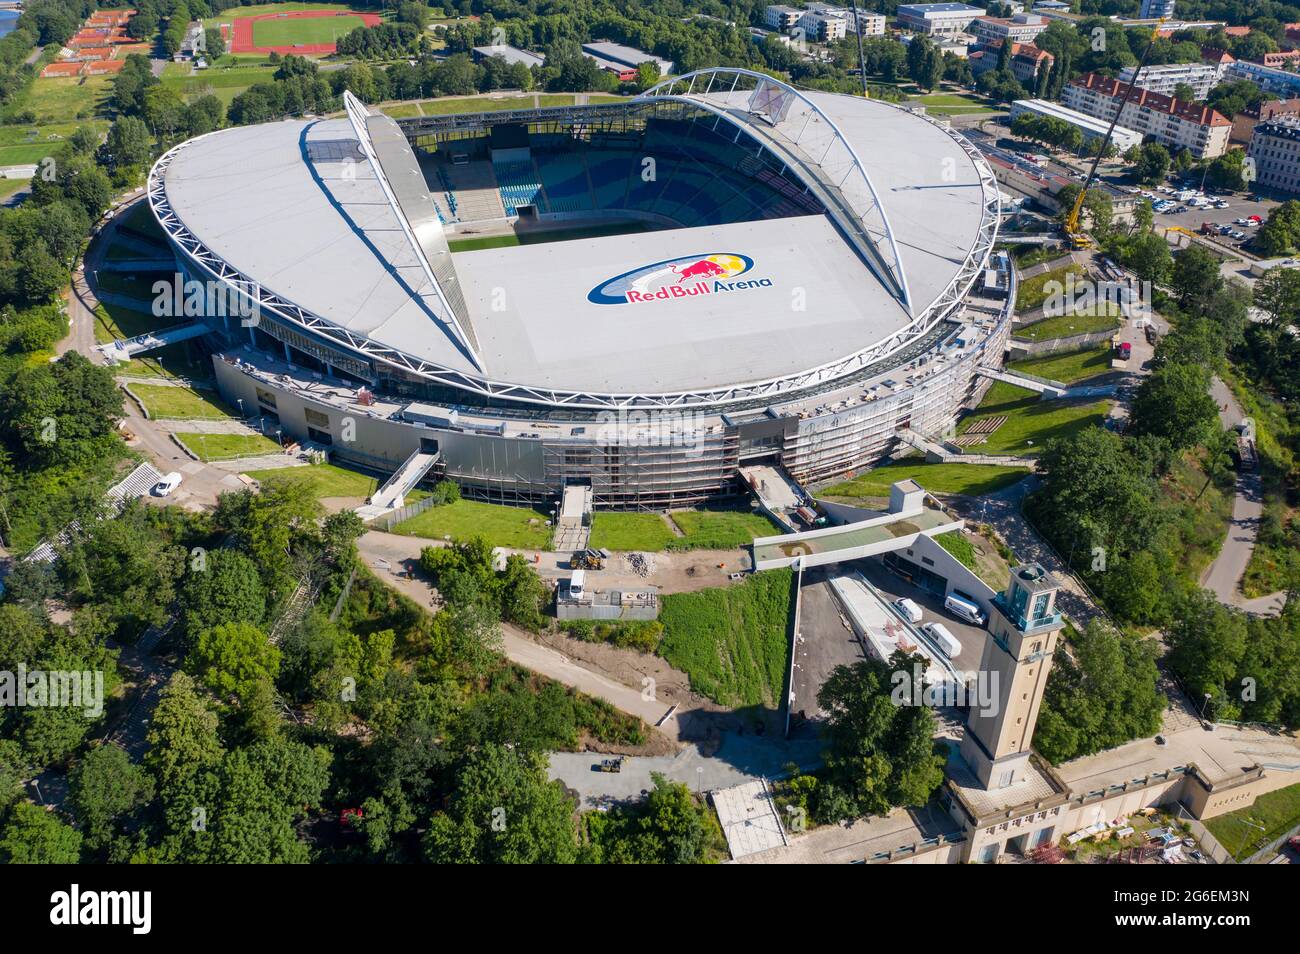 14 June 2021, Saxony, Leipzig: Football: Bundesliga, RB Leipzig. Two cranes are at the Red Bull Arena. The home ground of the Rasenballers is being rebuilt. The spectator capacity will increase from 42,558 to 47,069 in standing and seated areas. The outside of the stadium is enclosed with a soundproof facade. The embankment of the former Zentralstadion, which encompasses the arena, was cut open behind the historic bell tower to make room for a new entrance. RB Leipzig is investing a good 60 million euros in the conversion by 2022. (Aerial view with drone) Photo: Jan Woitas/dpa-Zentralbild/dpa Stock Photo